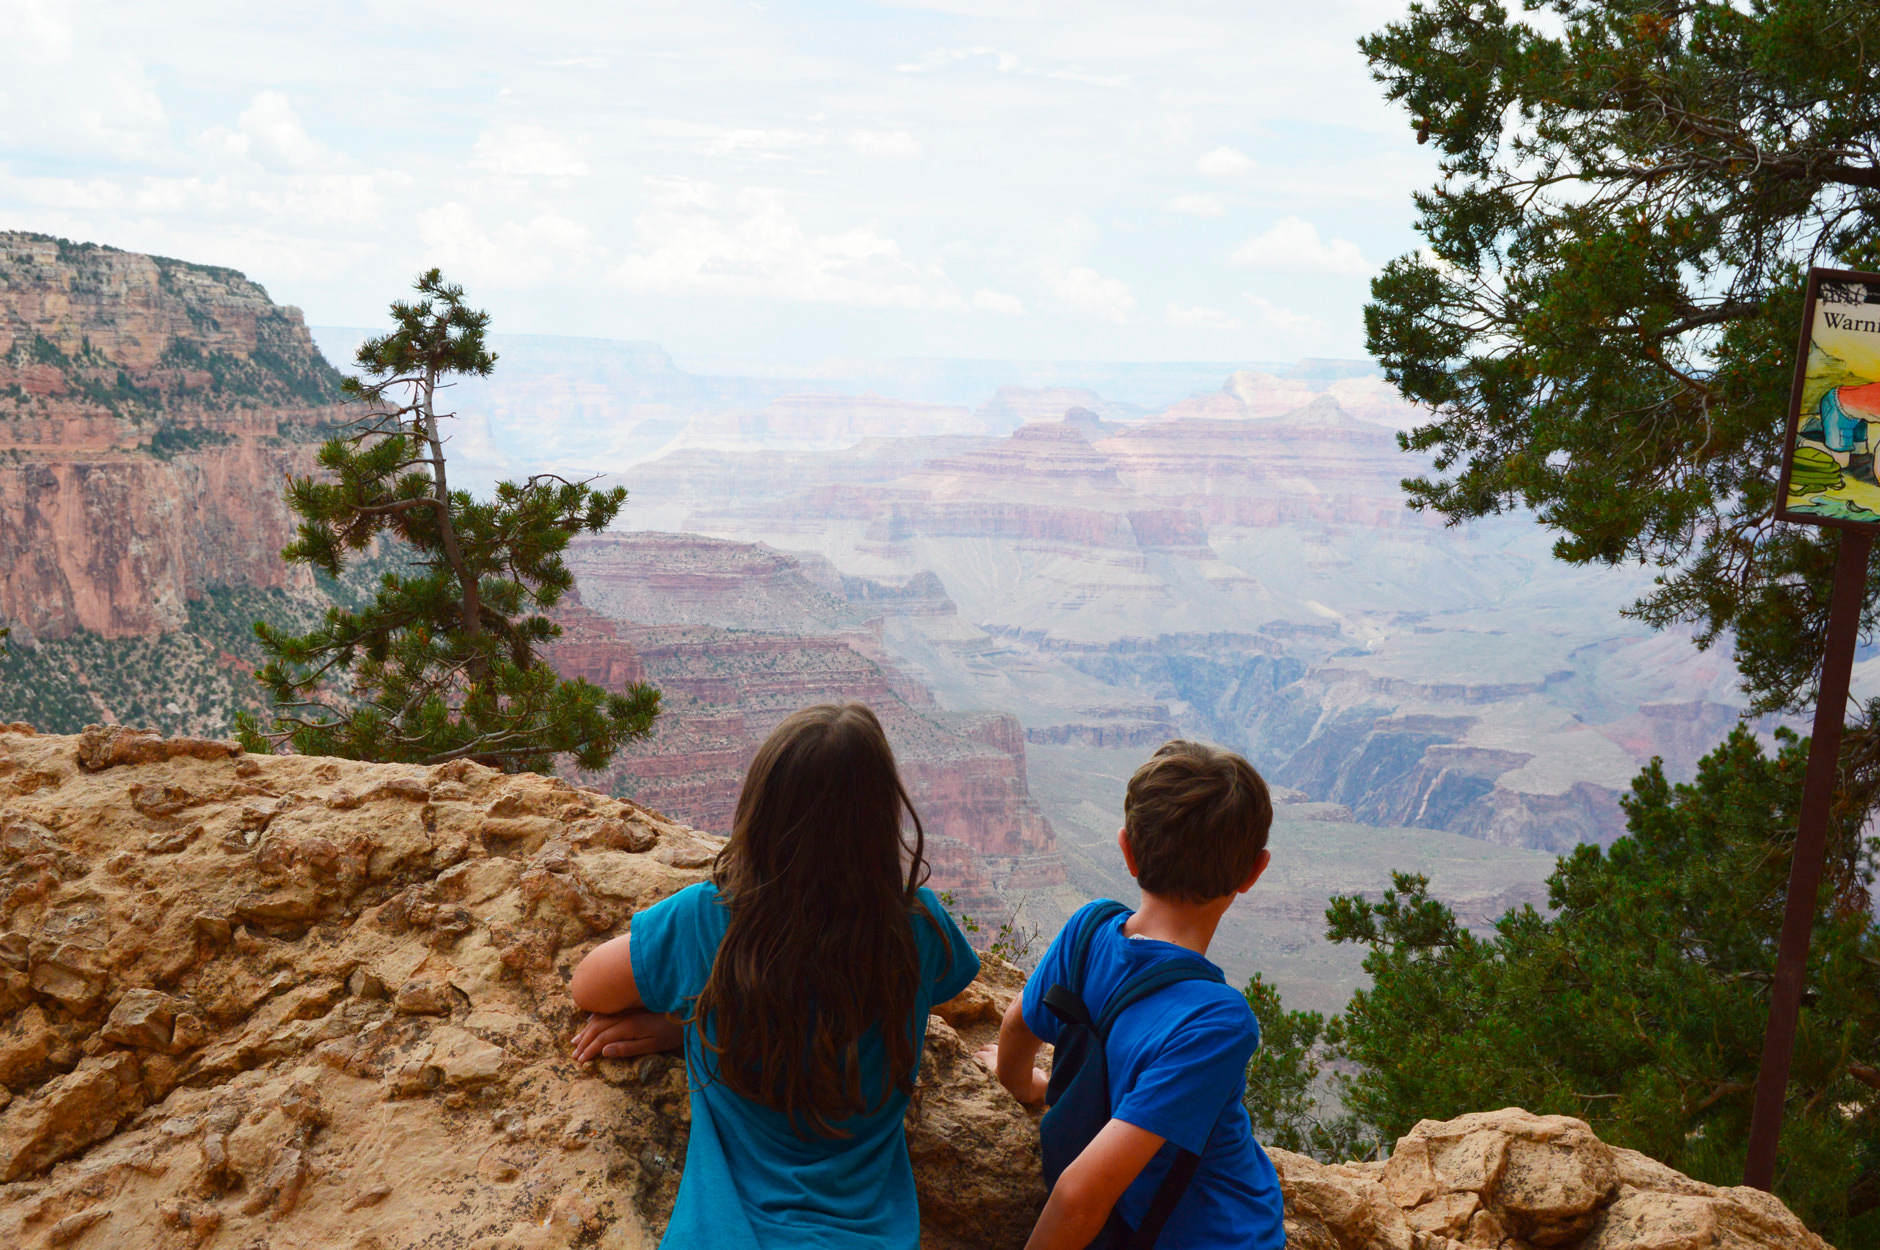 Kids overlooking a canyon.